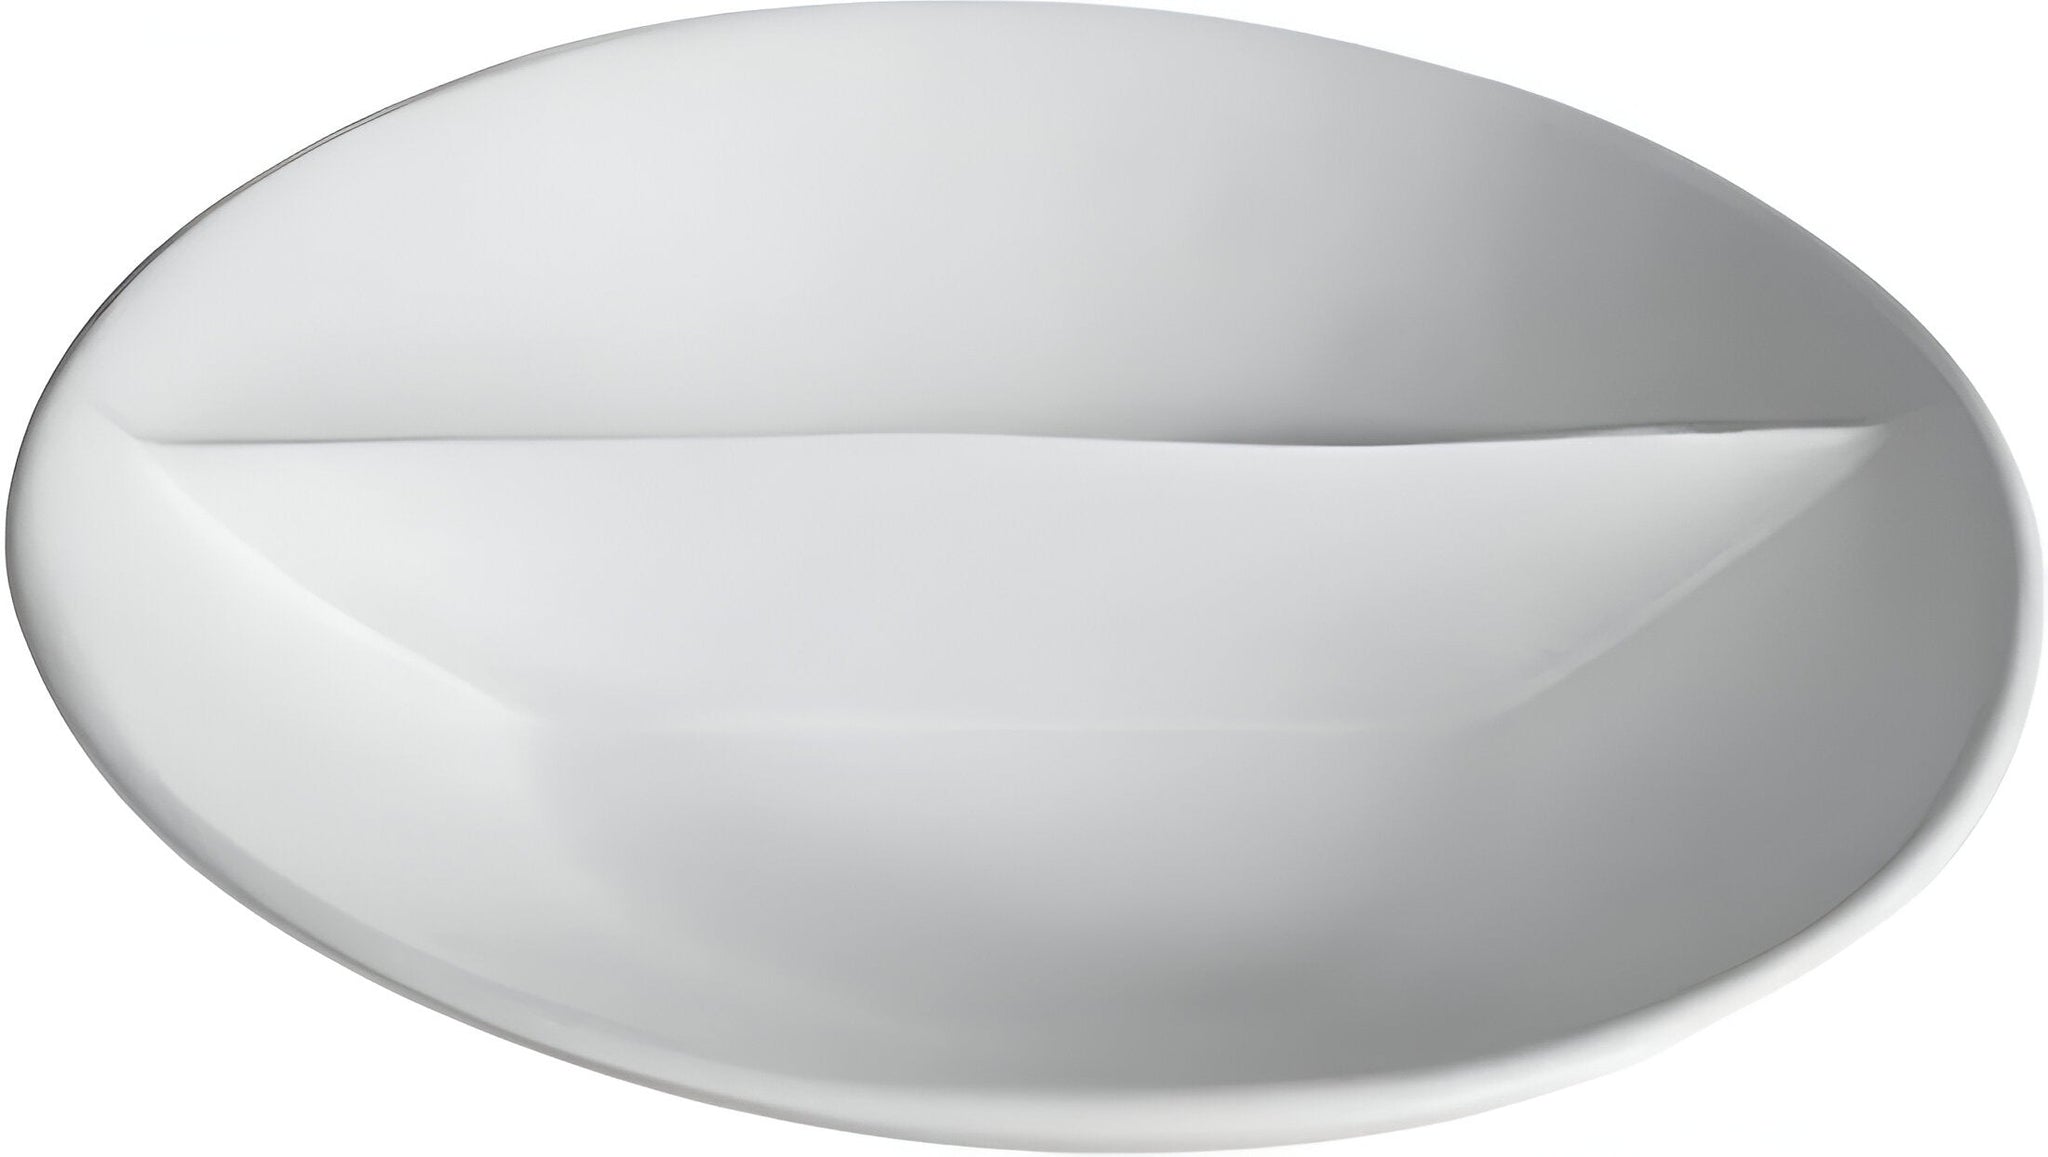 Bugambilia - Mod 3.2 Qt White Round Divided Platter With Glossy Smooth Finish - PR014-MOD-WW